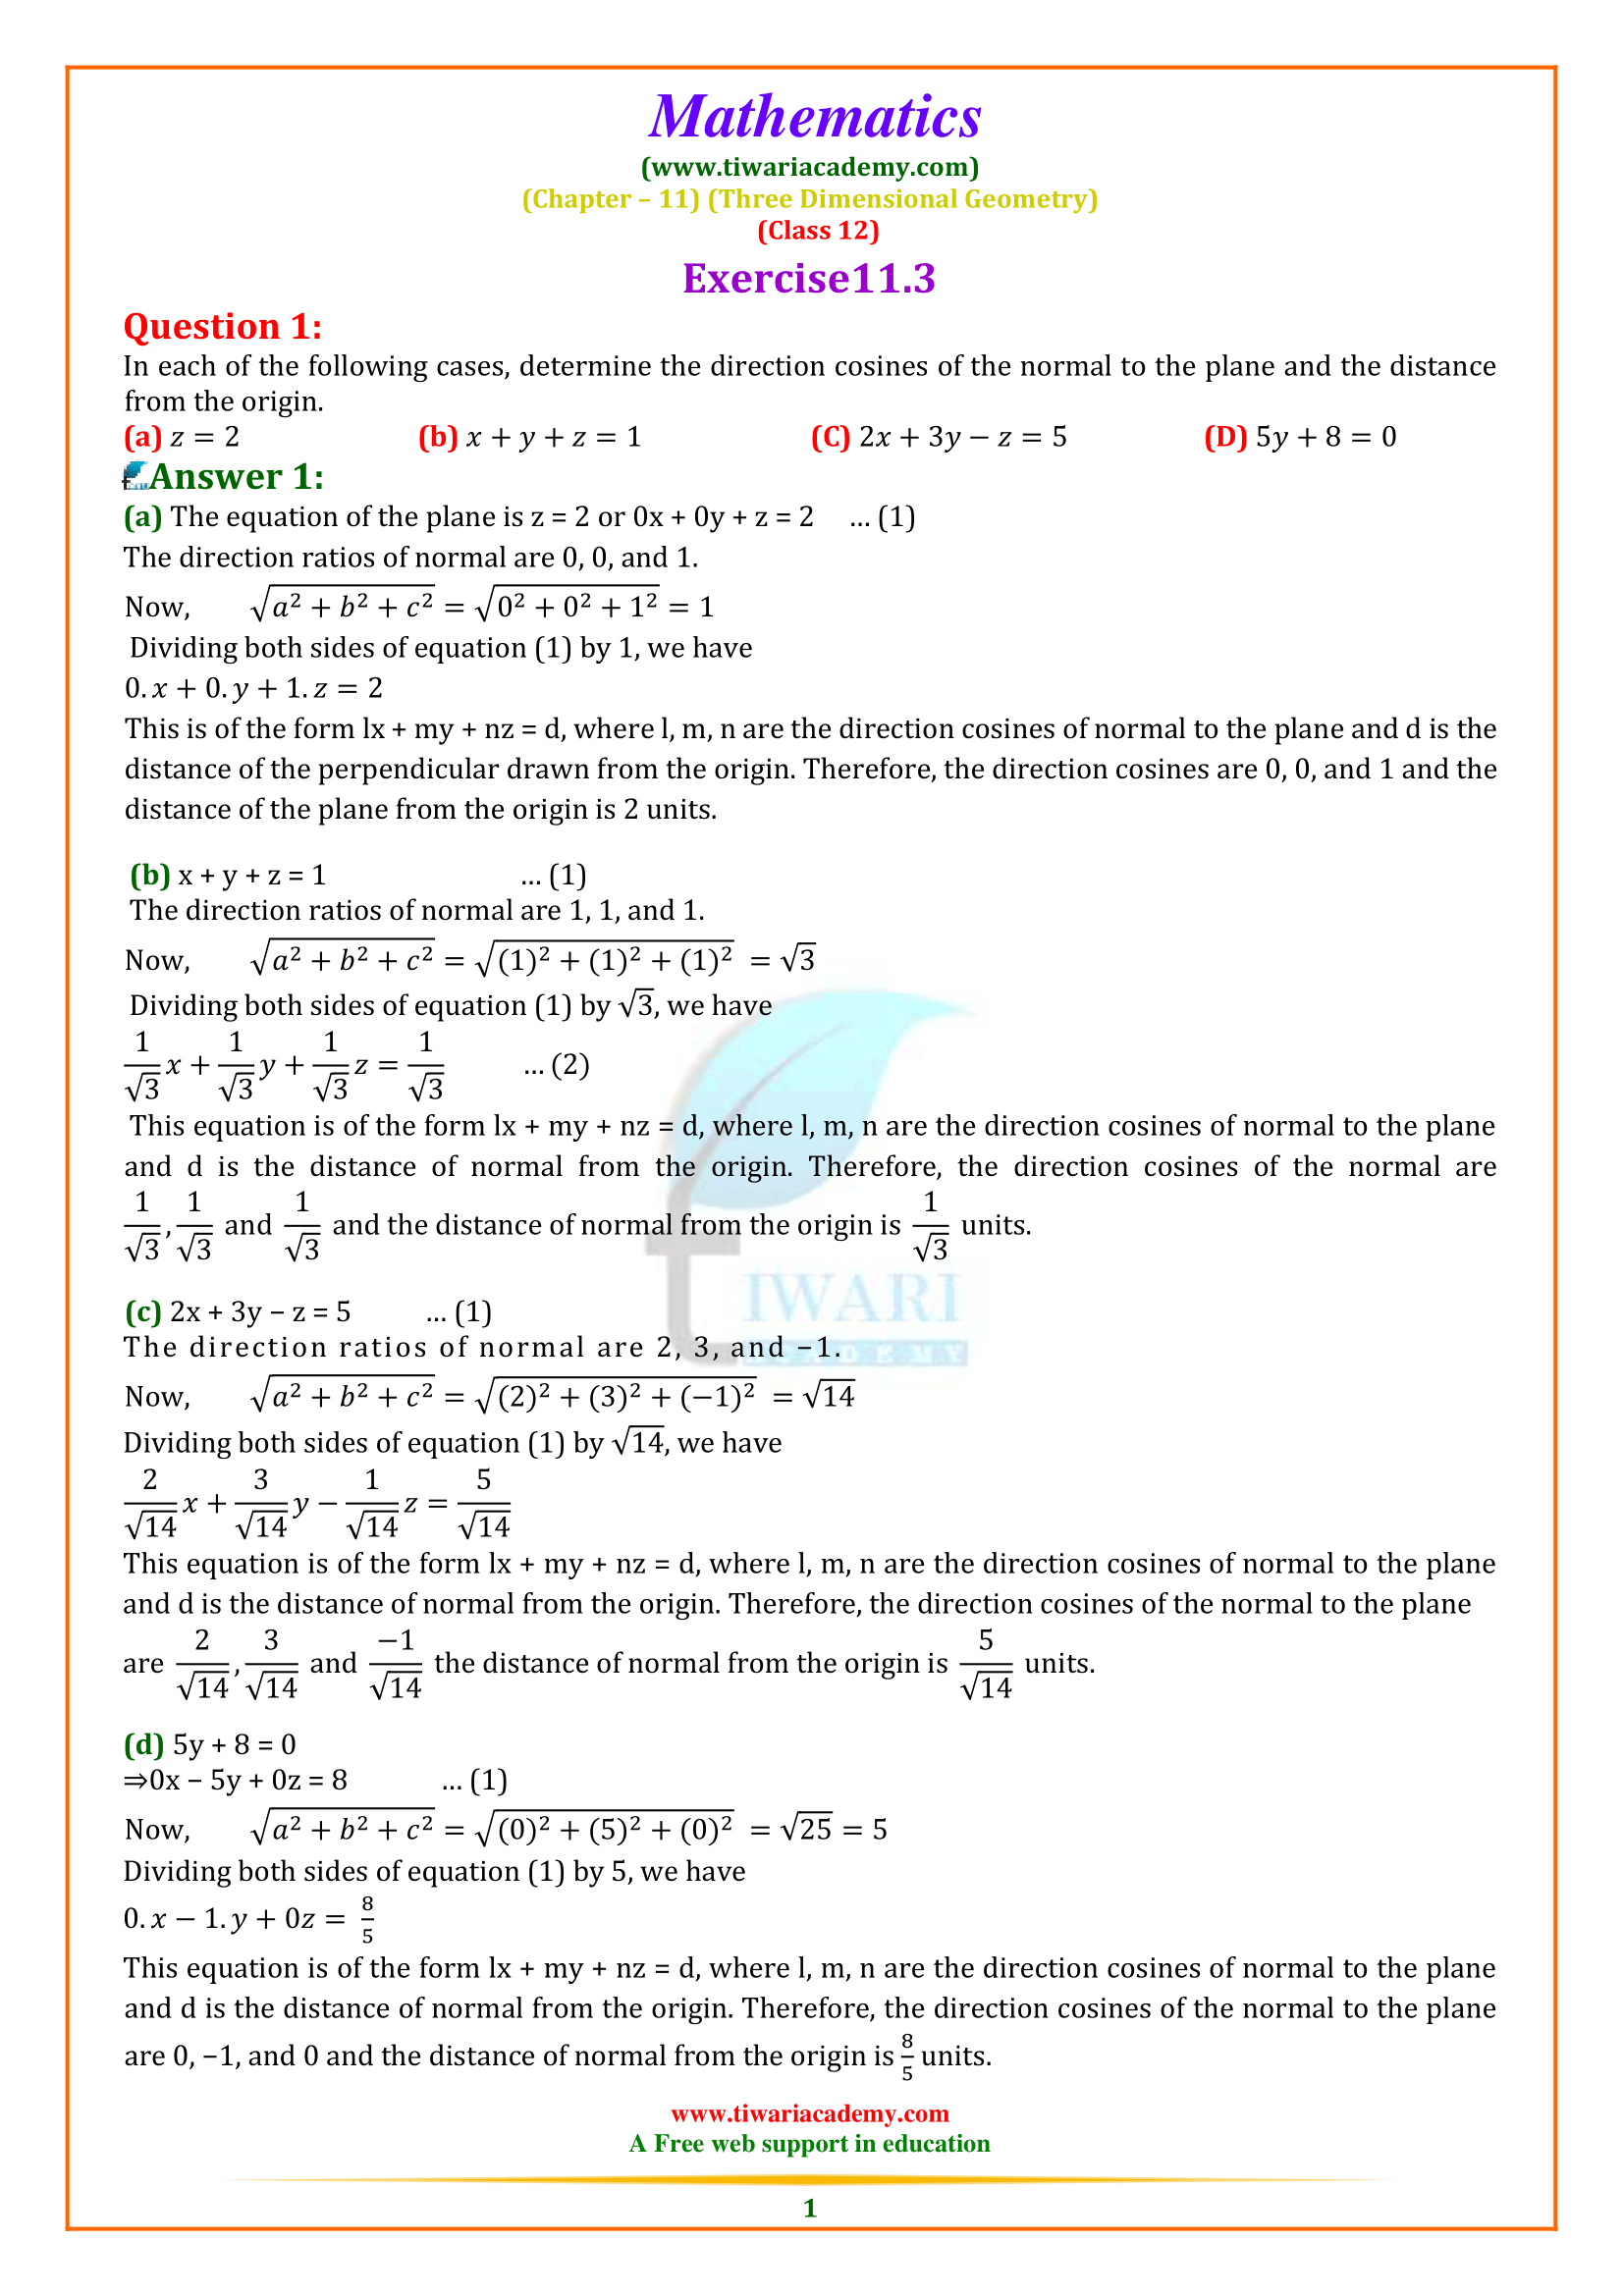 Class 12 Maths Chapter 11 Exercise 11.3 Solution in English Medium